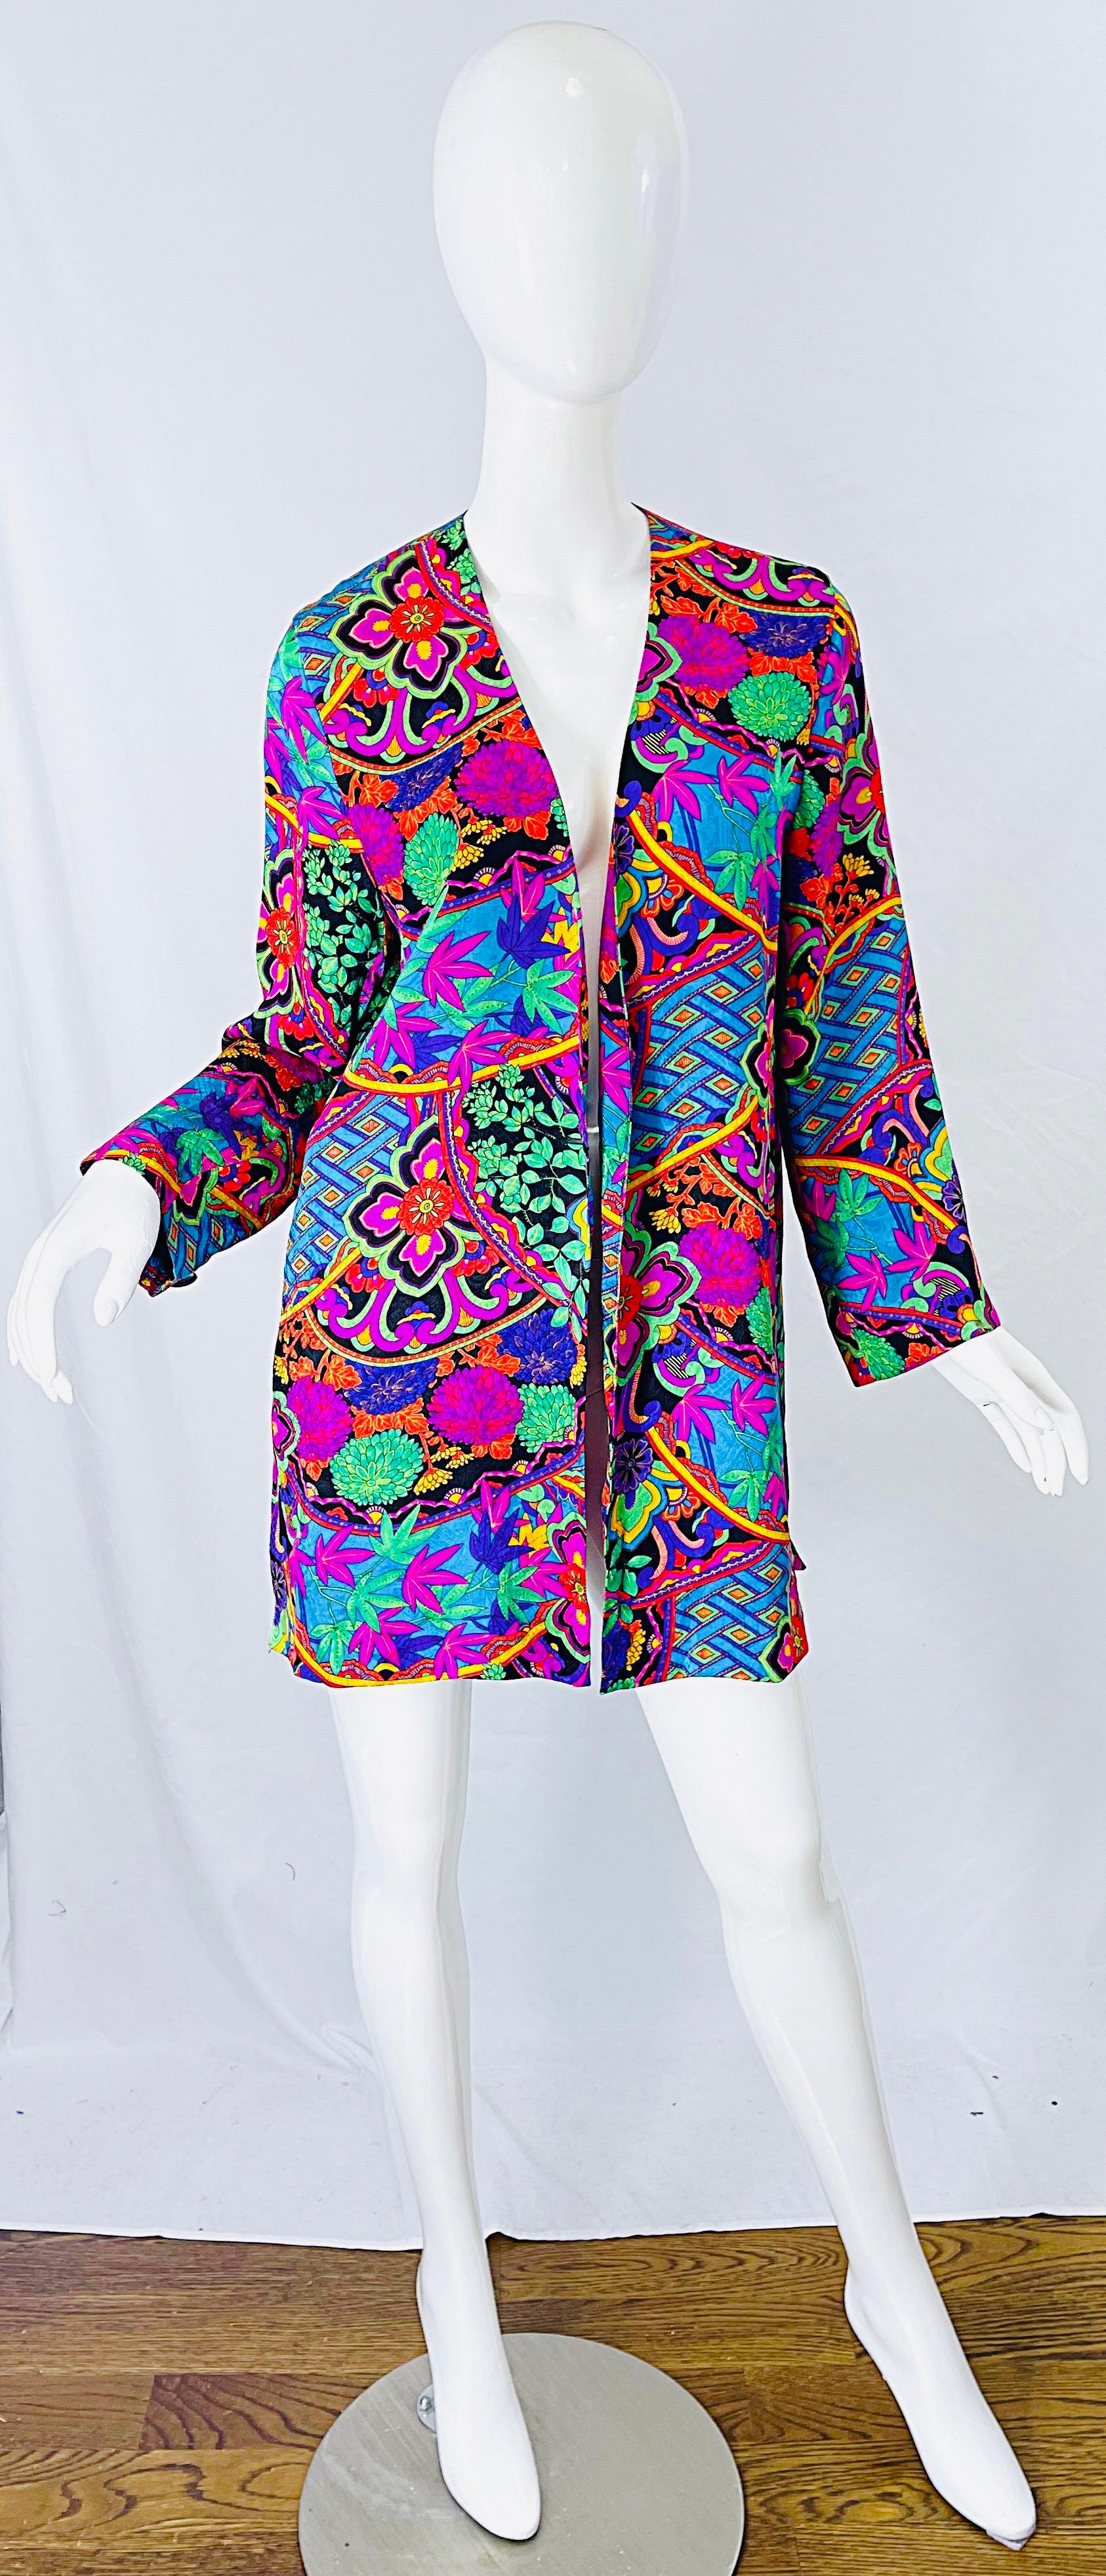 Chic and rare 1980s DIANE FREIS marijuana pot leaf novelty print silk kimono jacket ! I have always had a love for Diane Freis pieces. I have had hundreds, but never one like this. I didn’t even notice the pot leaves when I initially purchased it. I